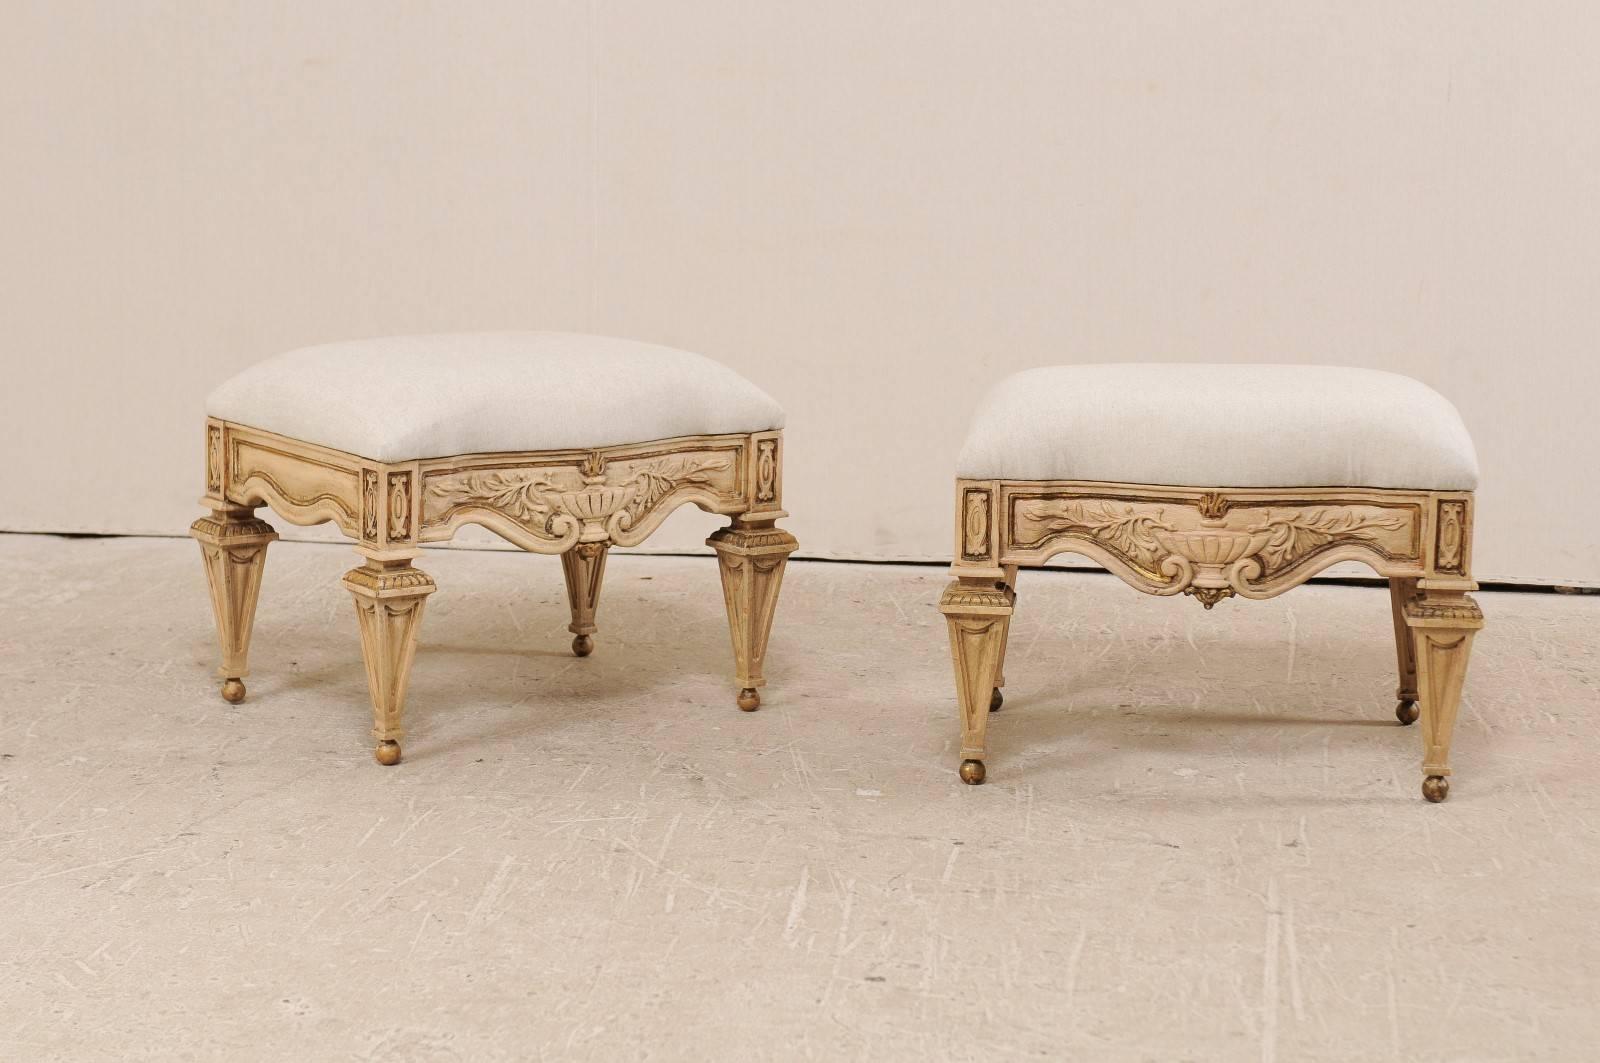 A pair of vintage carved wood and upholstered stools. This pair of American stools are richly carved ashwood in an Italian style. The skirt is valanced with a stylized urn and scroll motif at their centers. The stools are raised upon exquisitely